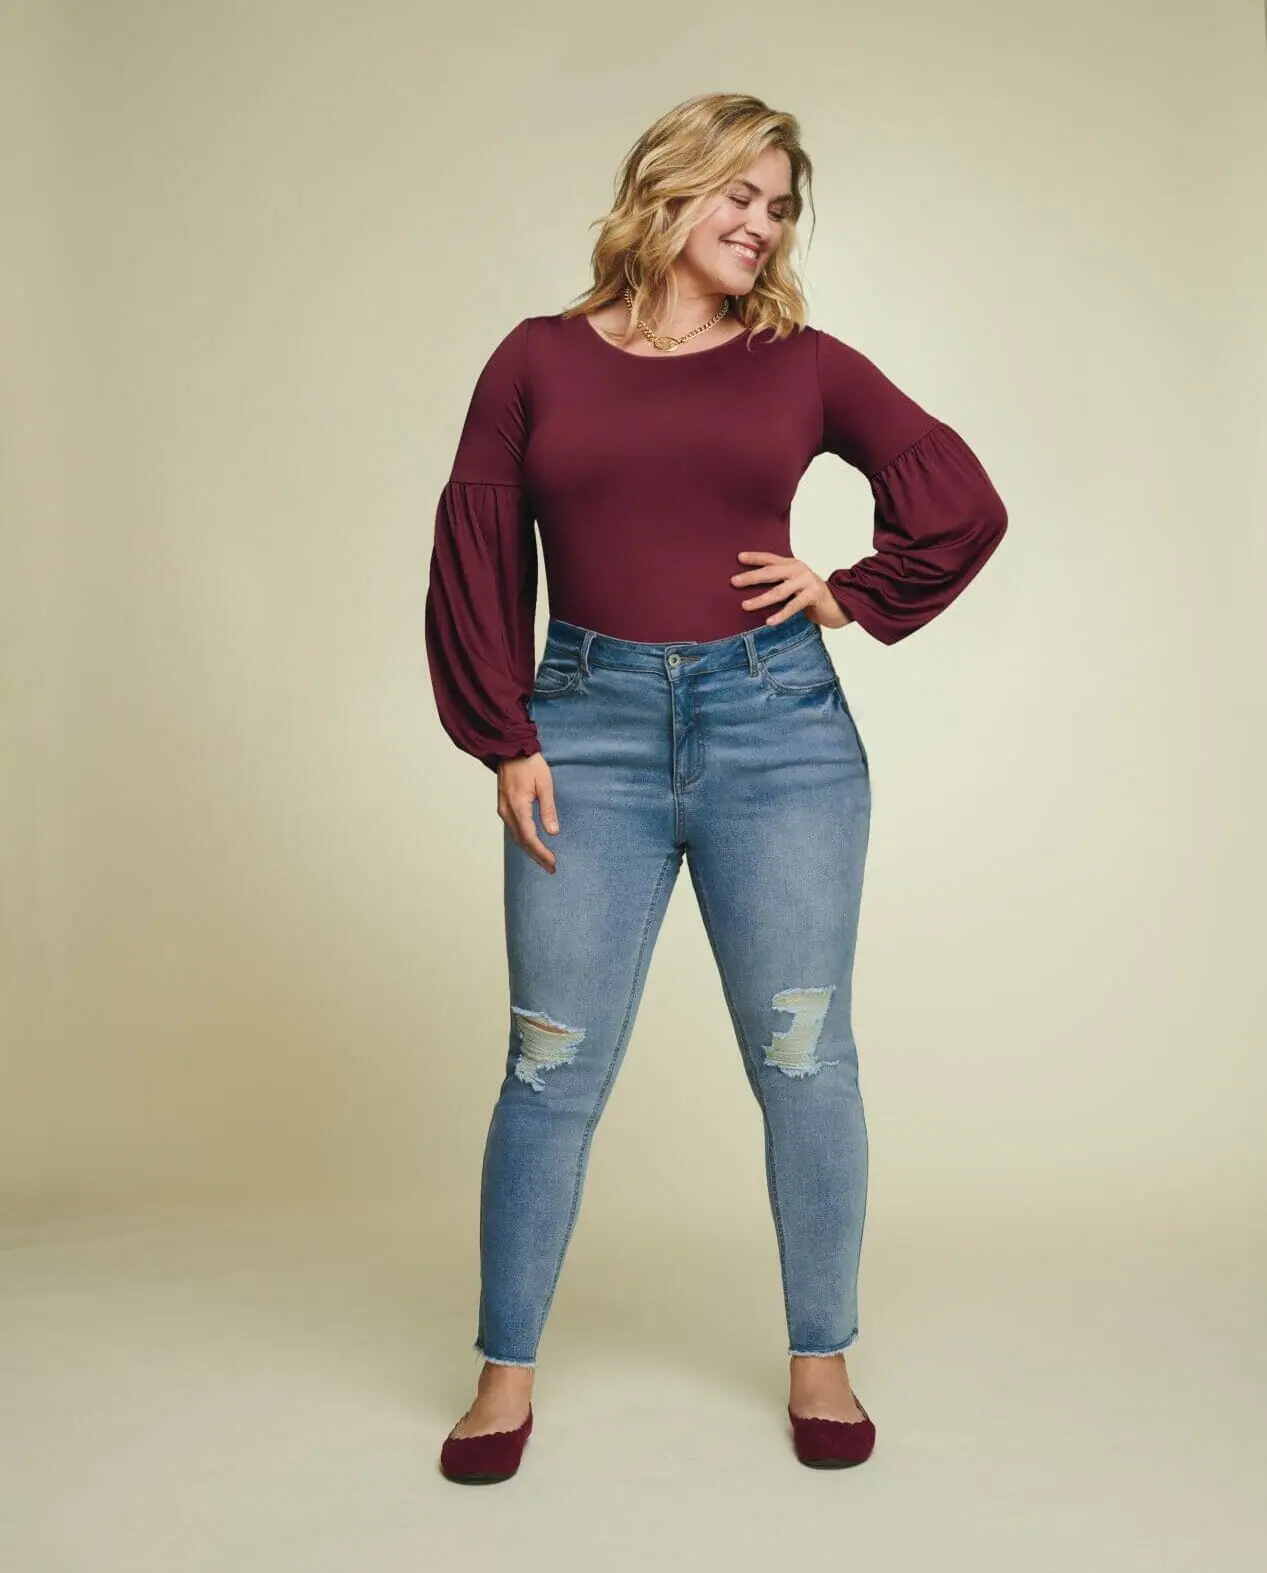 Plus size clothing for women  See the selection of beautiful clothes in  plus size here